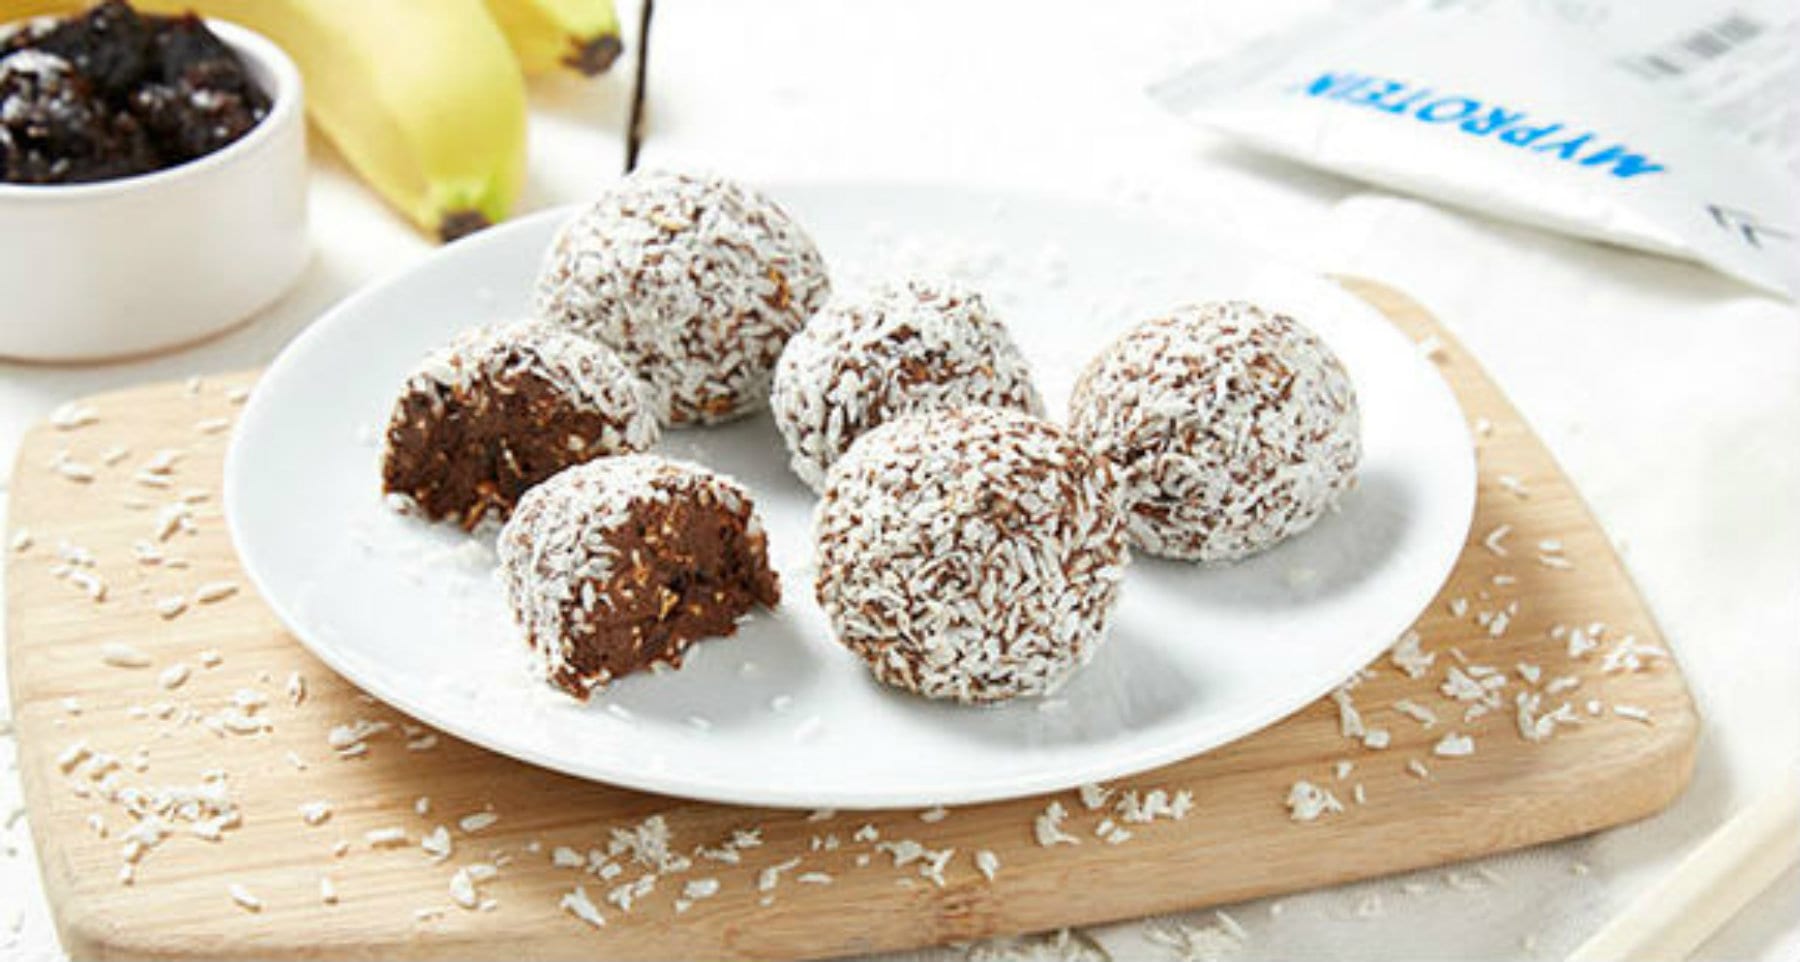 Coconut & Whey Protein Balls | On The Go Snack